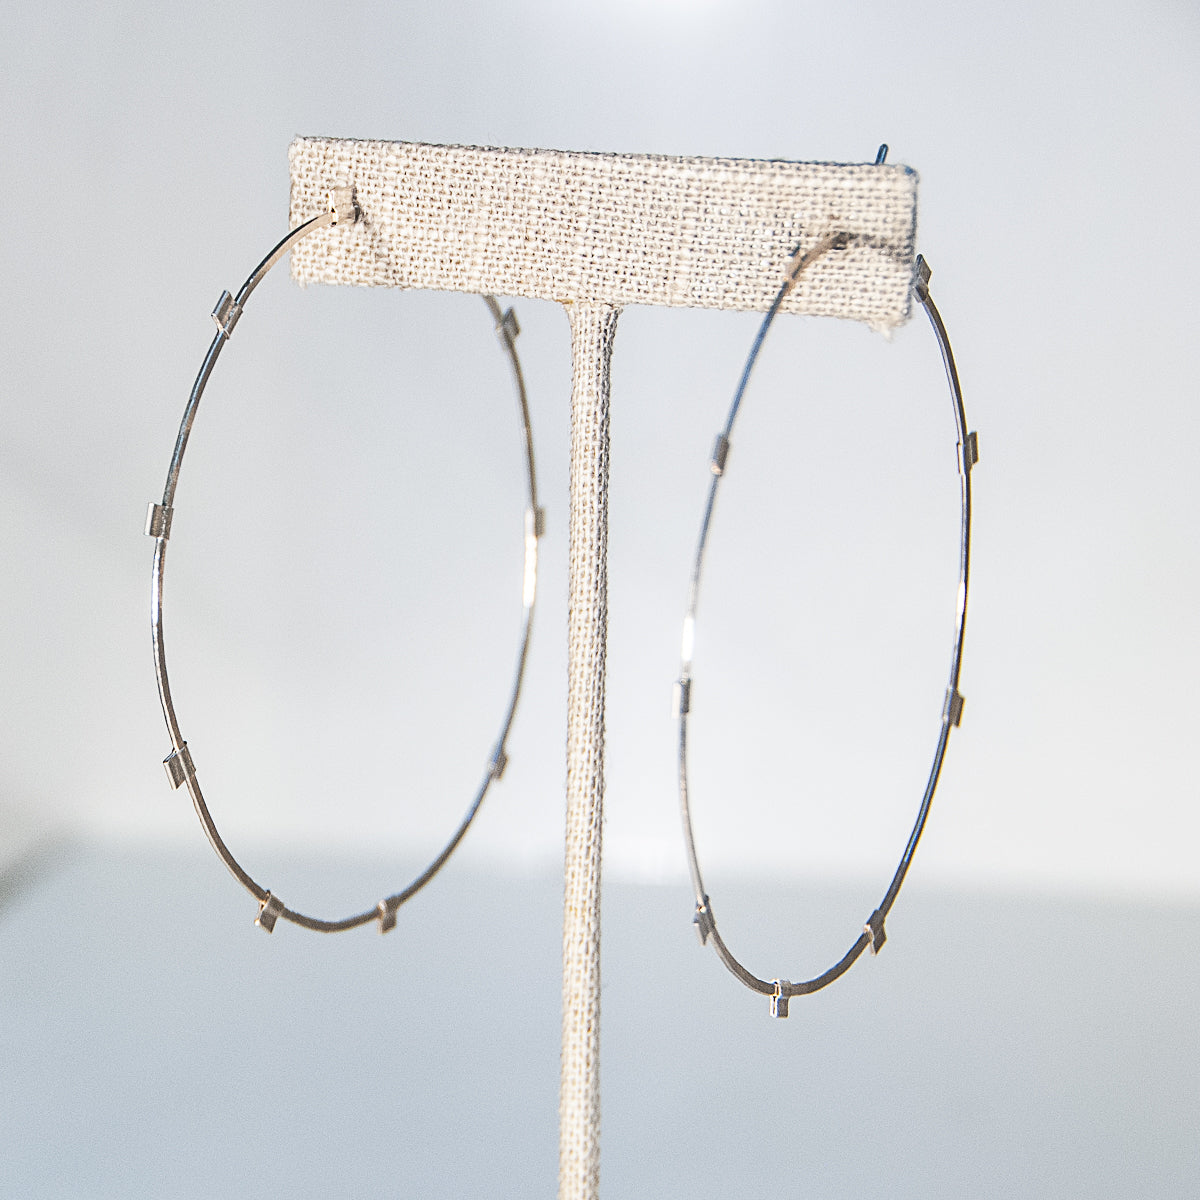 XL Spark Hoops - Sterling Silver